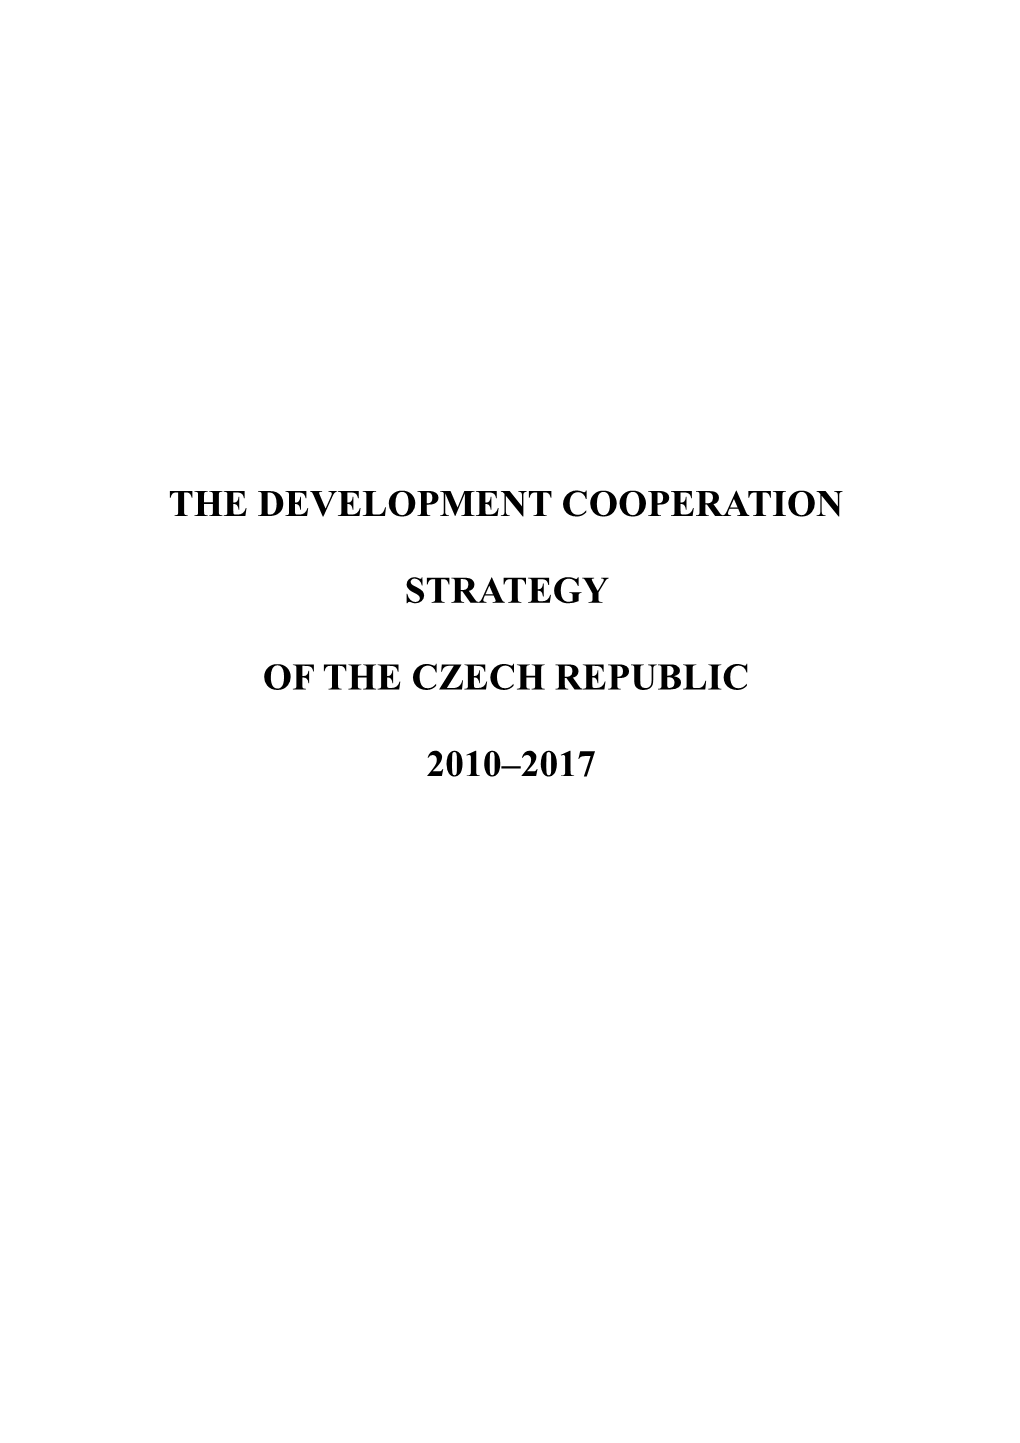 The Development Cooperation Strategy